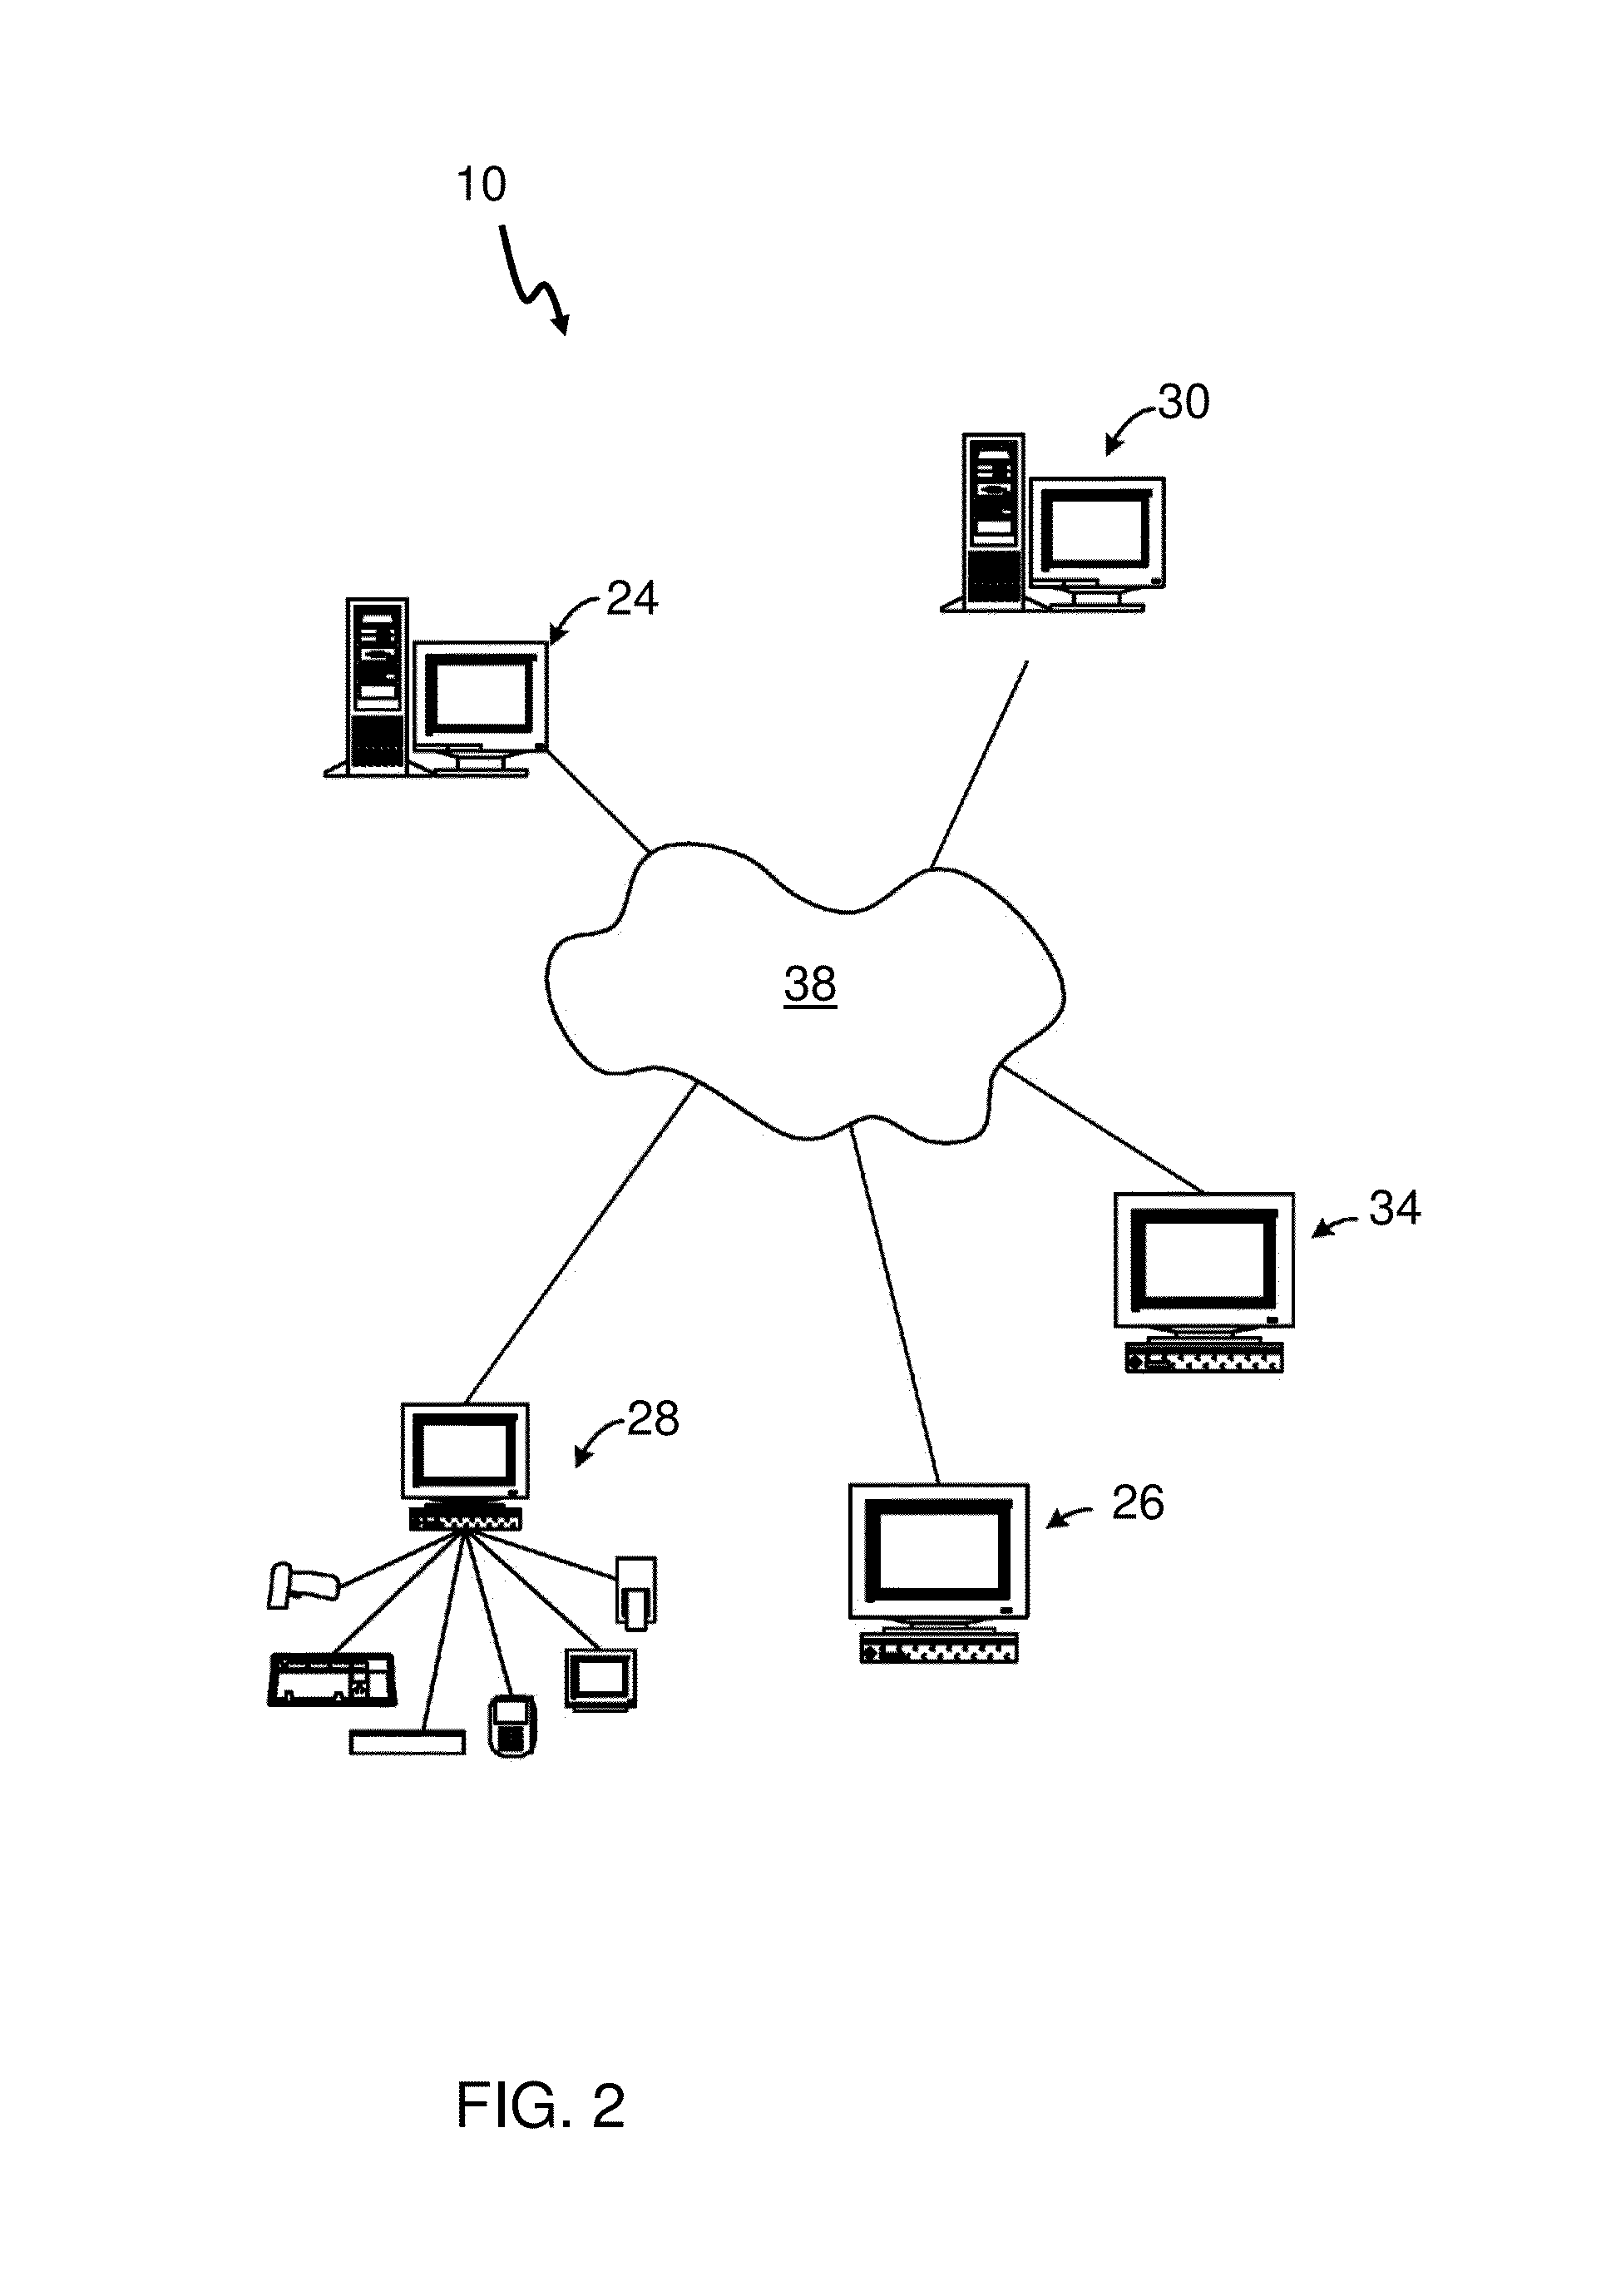 System, method, and non-transitory computer-readable storage media for allowing a customer to place orders remotely and for the order assembler to communicate directly with the customer